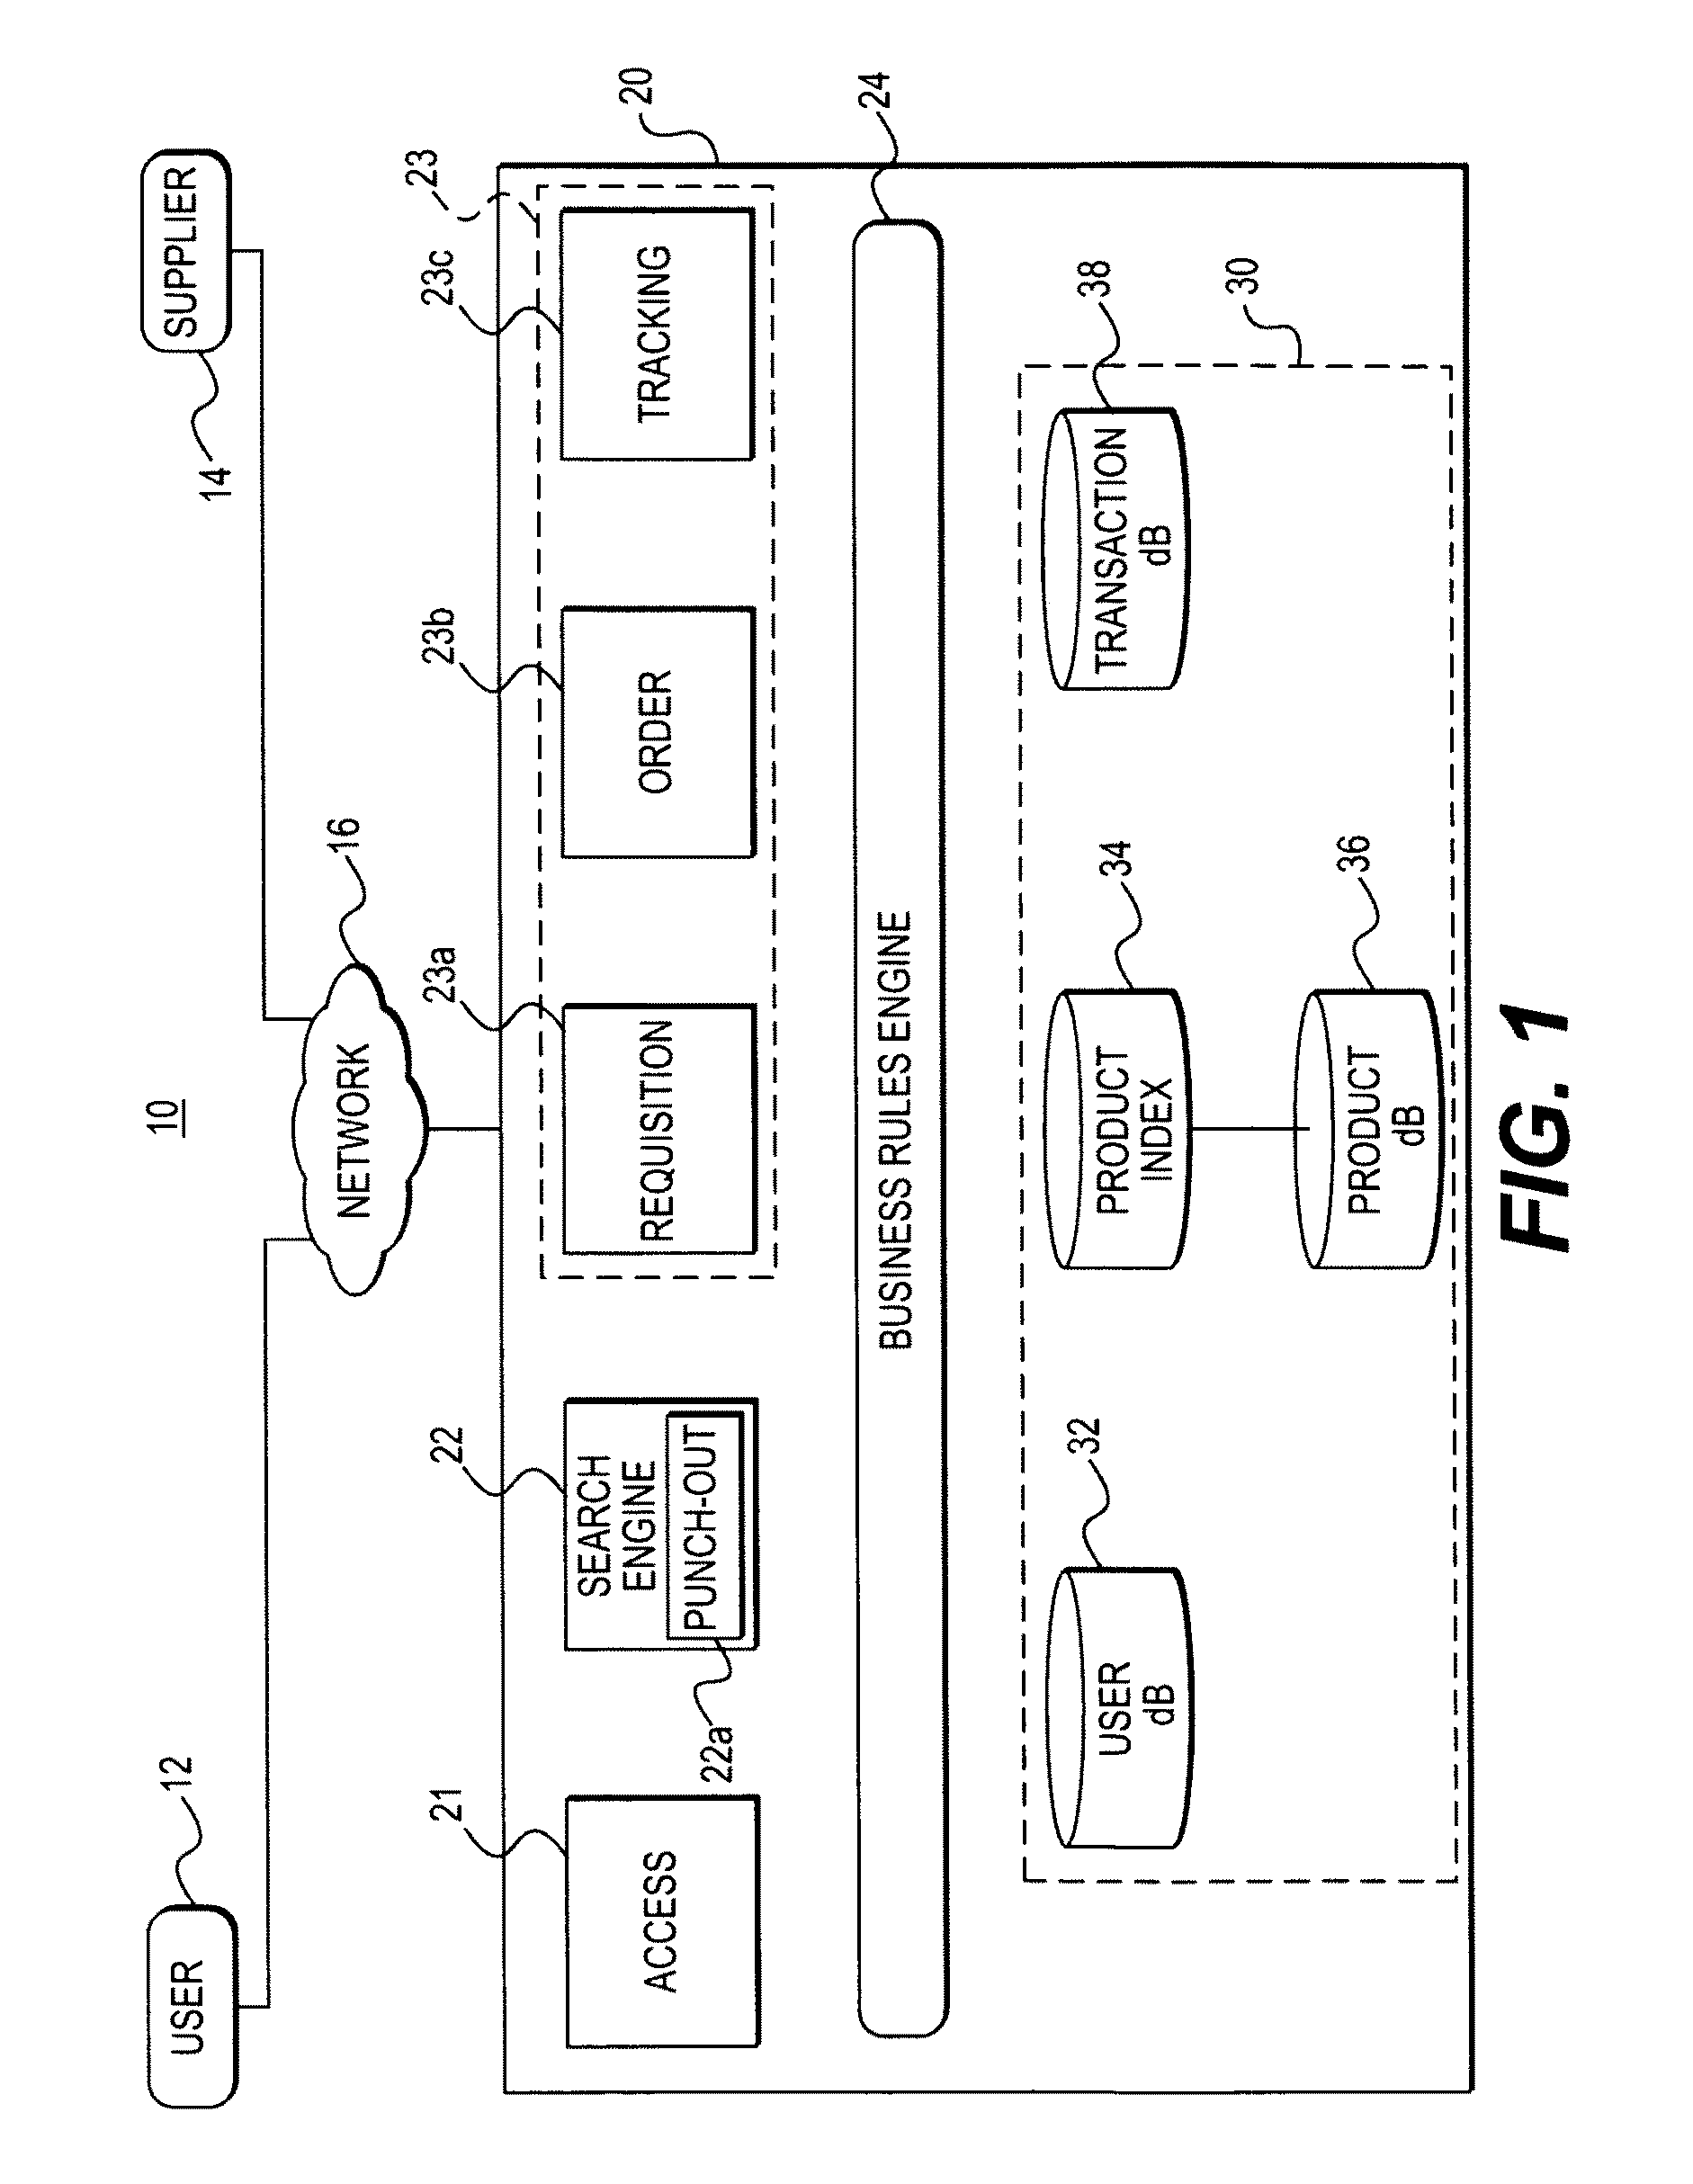 Method, medium, and system for automatically moving items from a first shopping cart to a second shopping cart